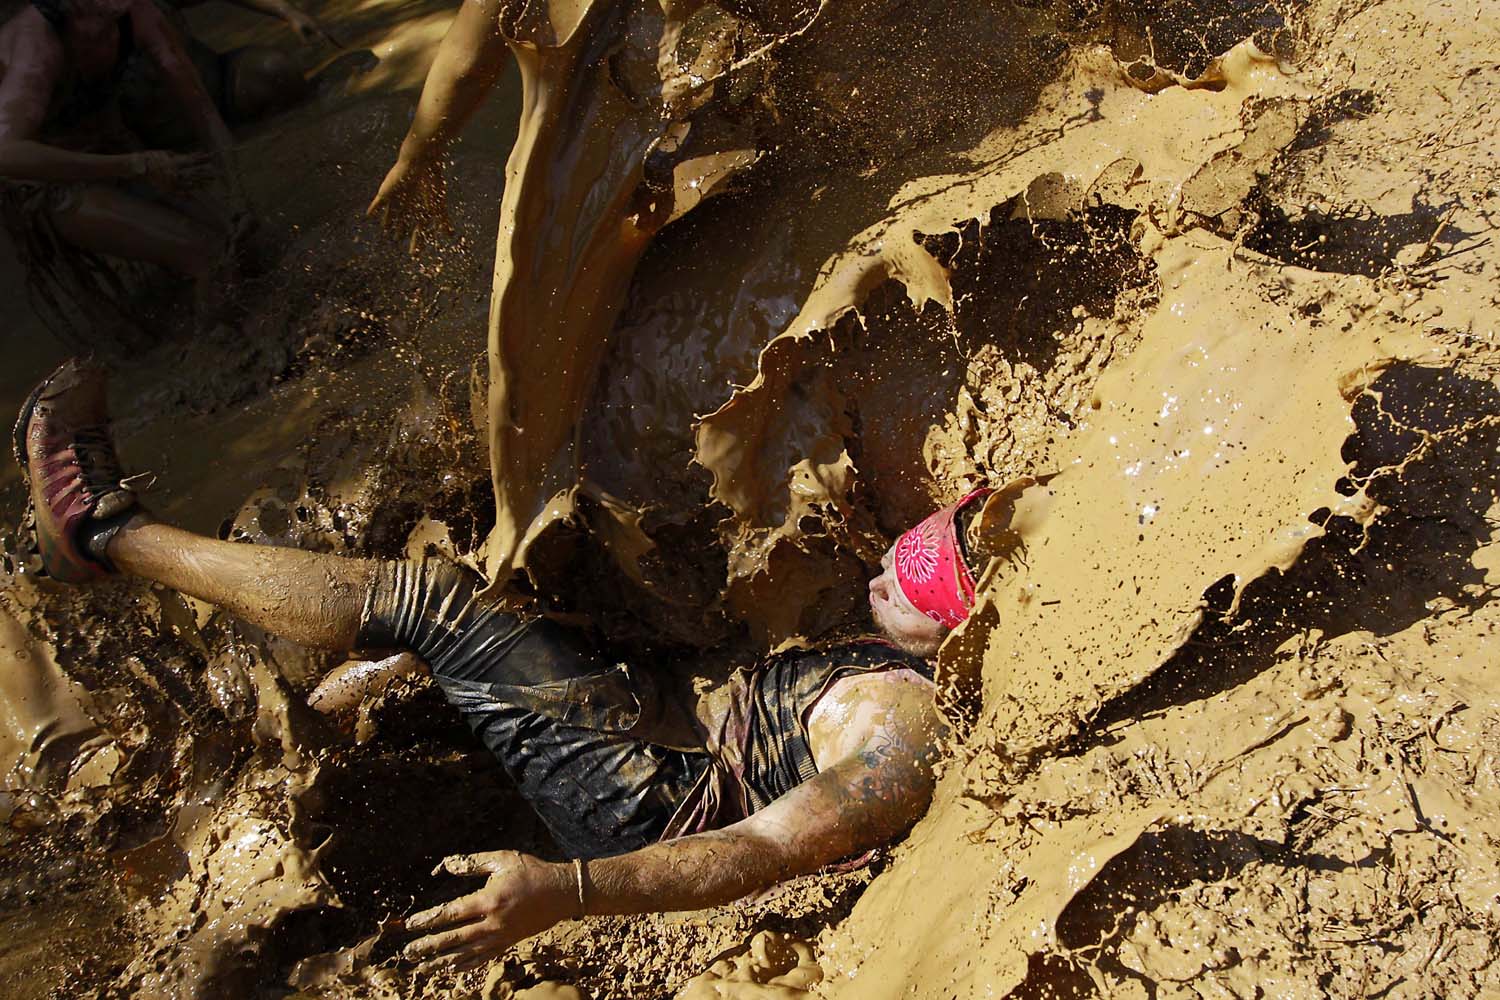 A participant falls into muddy water after getting over a muddy mound during the Warrior Dash obstacle race in Crawfordsville